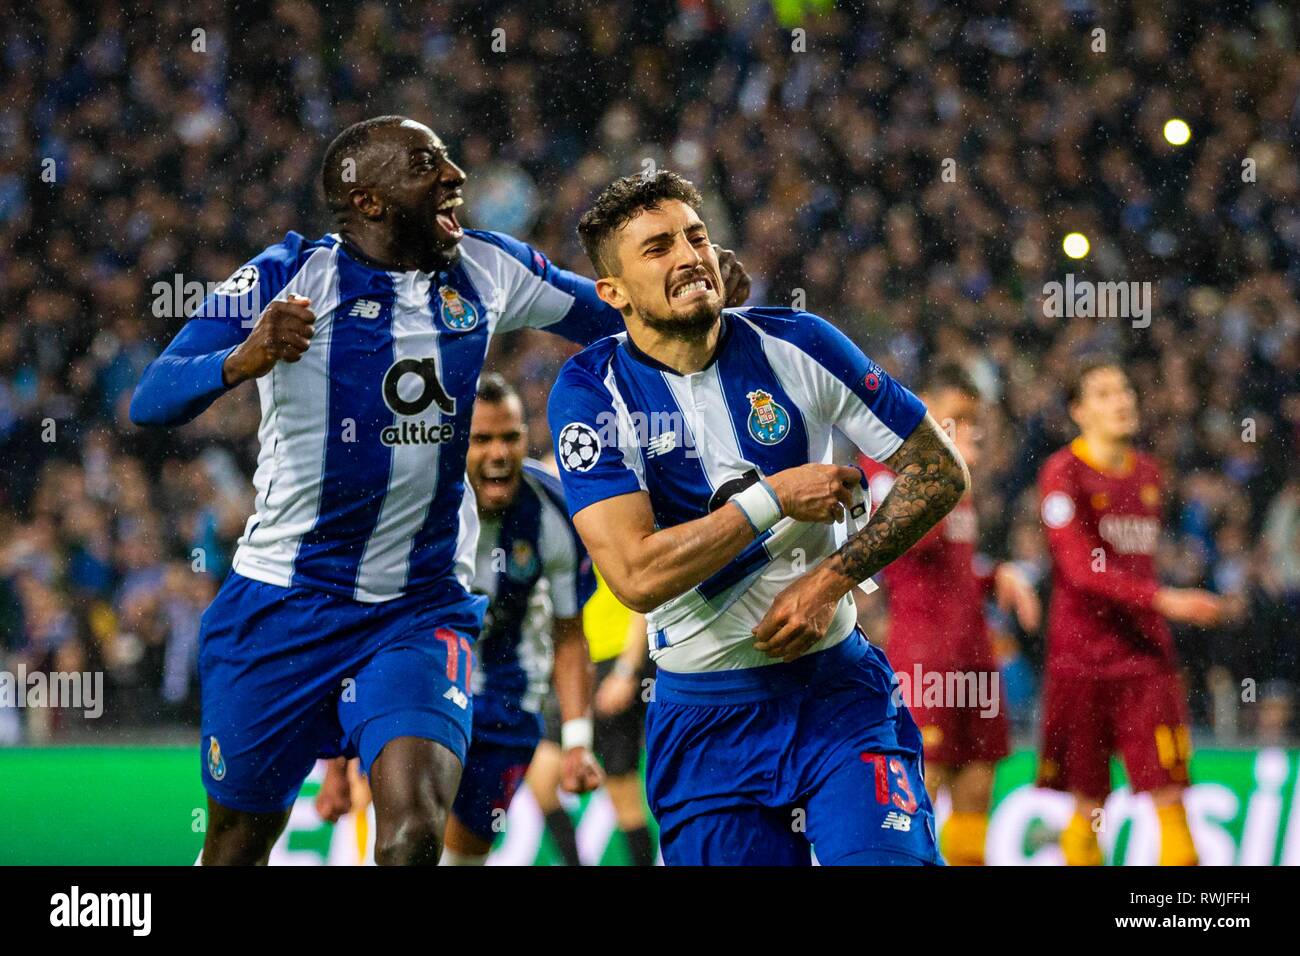 FC Porto's players Alex Telles (R) and Moussa Marega (L) celebrates the  third goal during the match against AS Roma for the UEFA Champions League  round 16th 2nd leg at Dragon Stadium